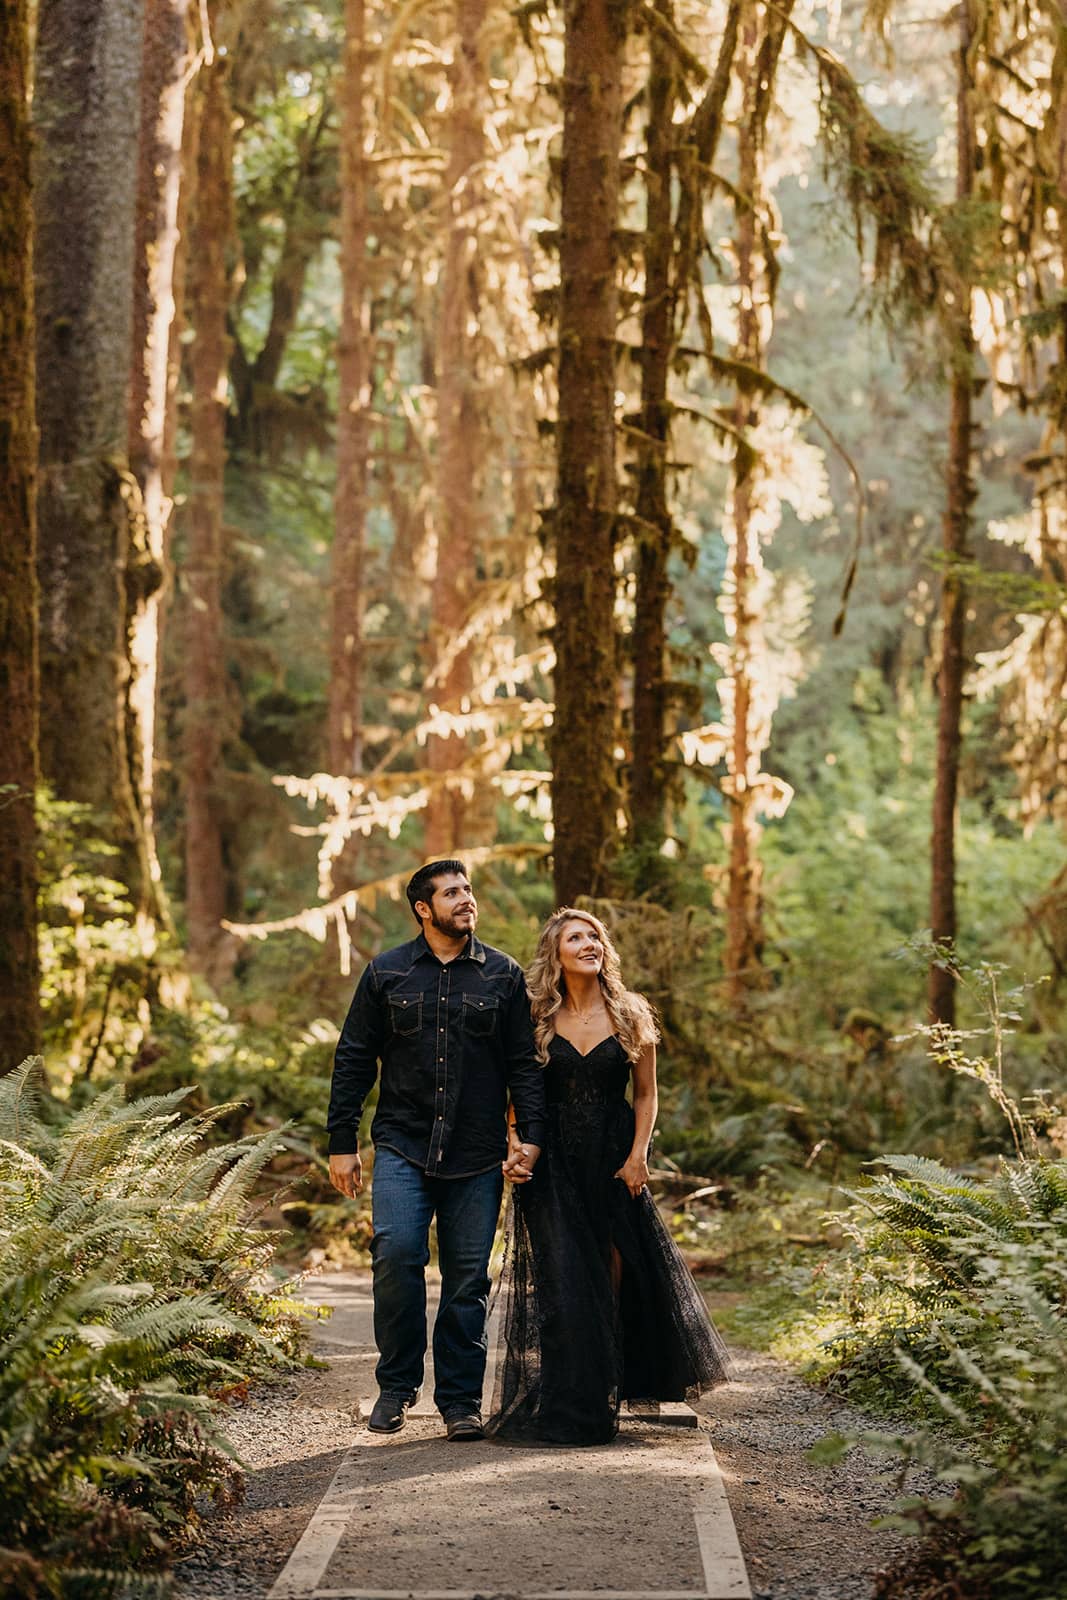 The couple walks together through the forest. 